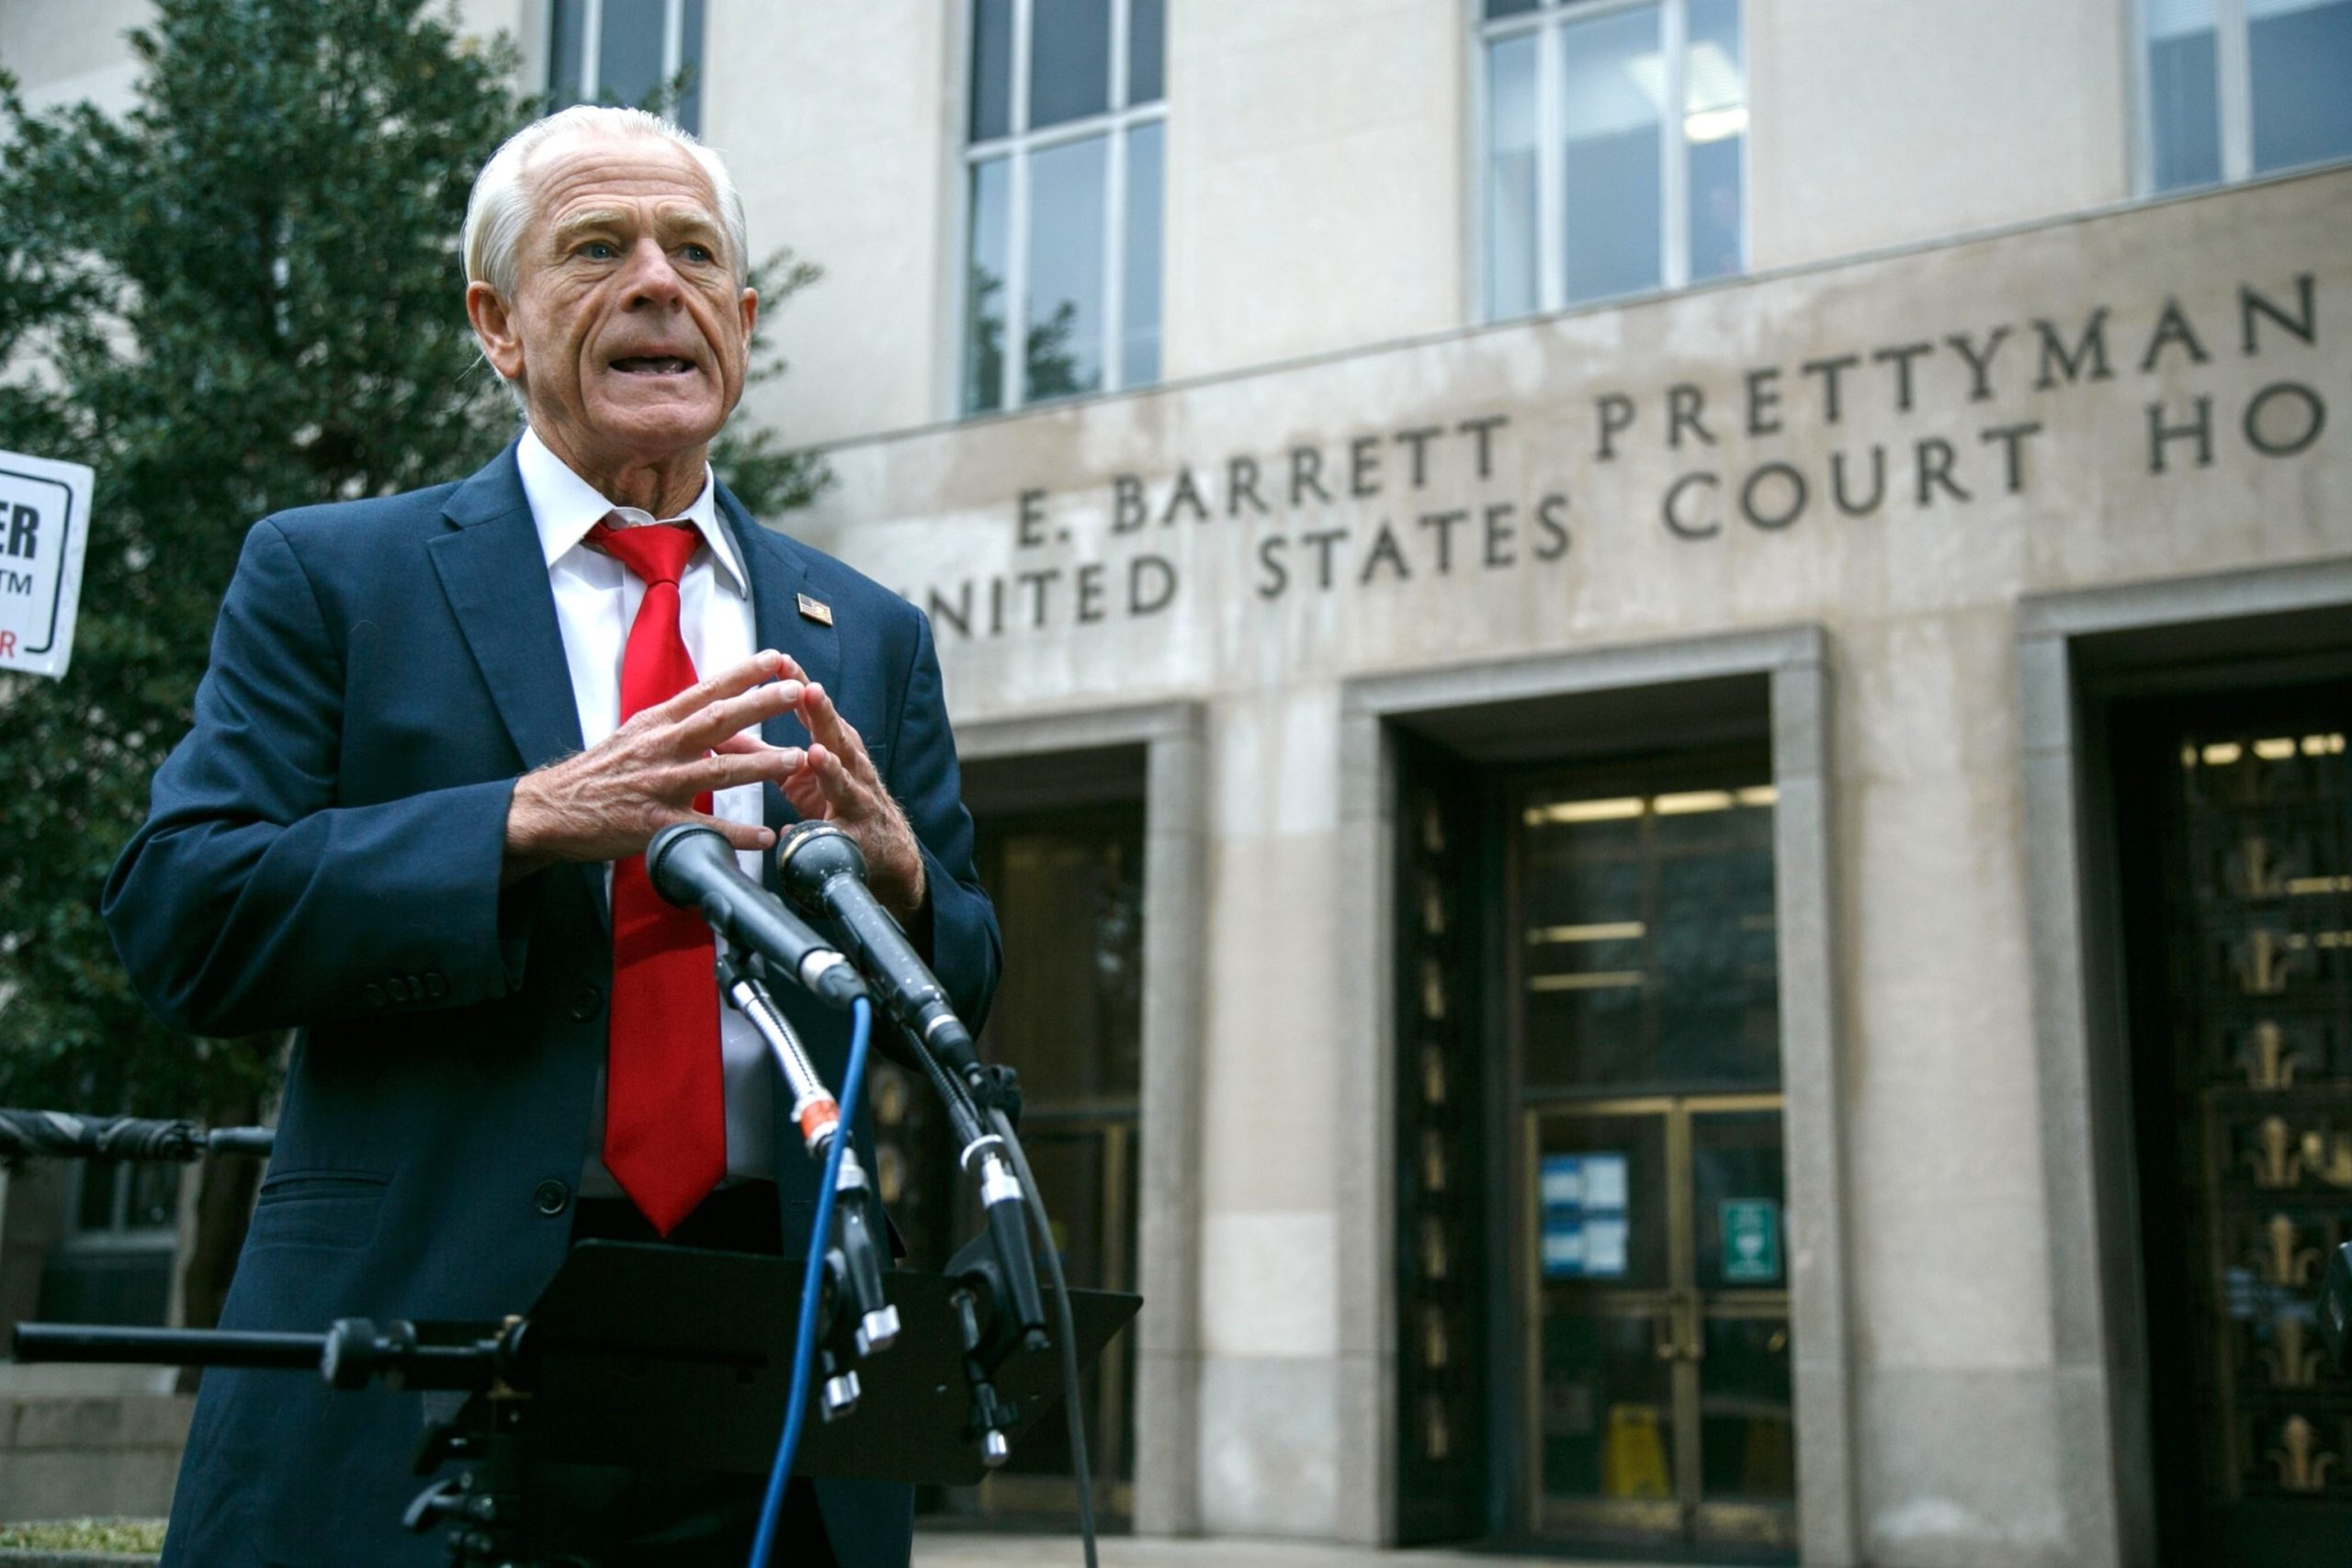 Judge denies Peter Navarro's request to stay free during appeal of contempt conviction